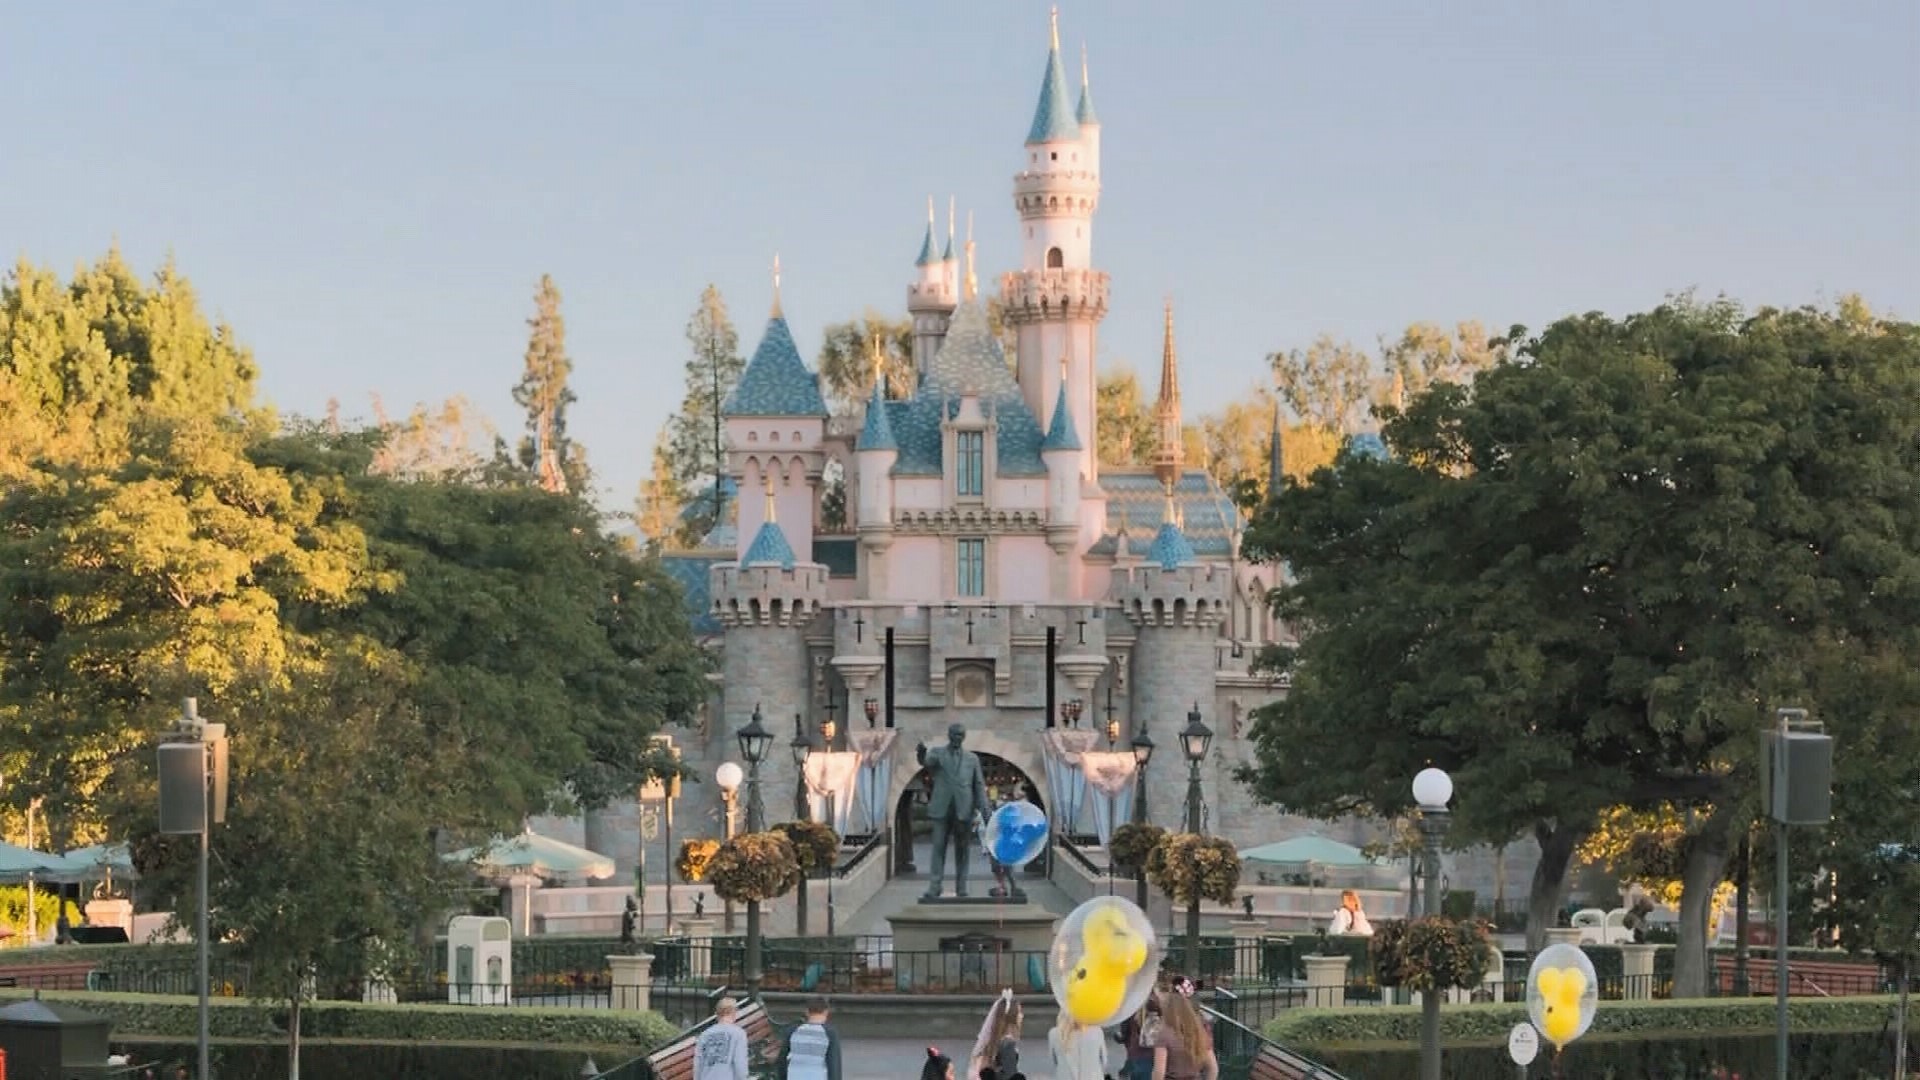 Congrats to Vickie Luttrell from Edmonds, the lucky winner of a three-day trip to Disneyland! Sponsored by Disneyland Resort.